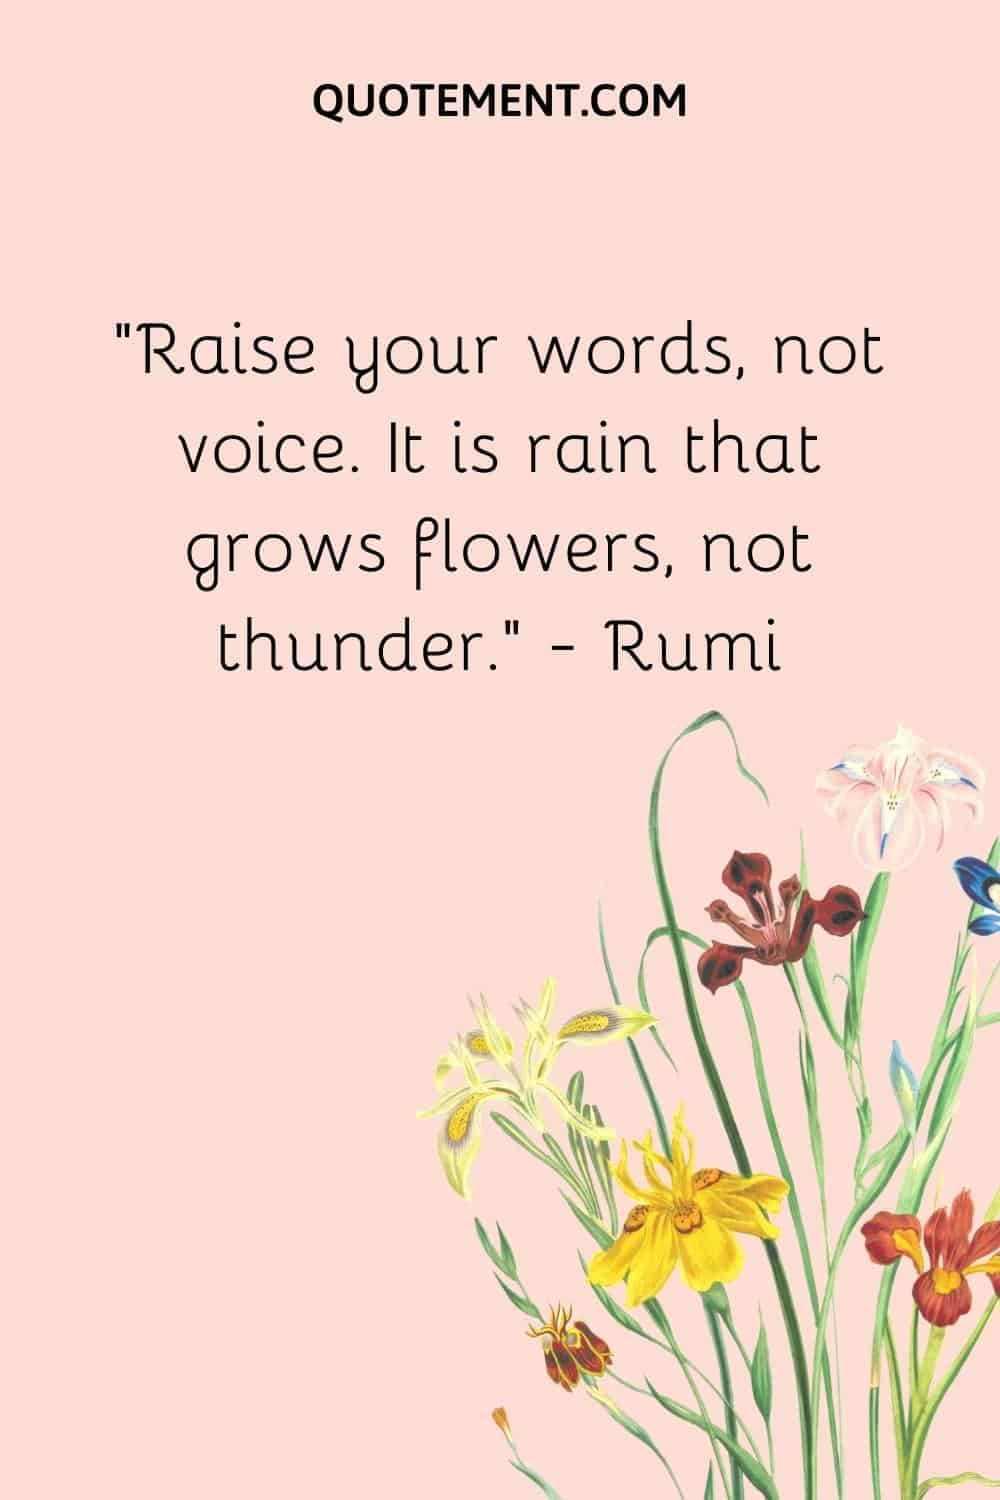 “Raise your words, not voice. It is rain that grows flowers, not thunder.” — Rumi